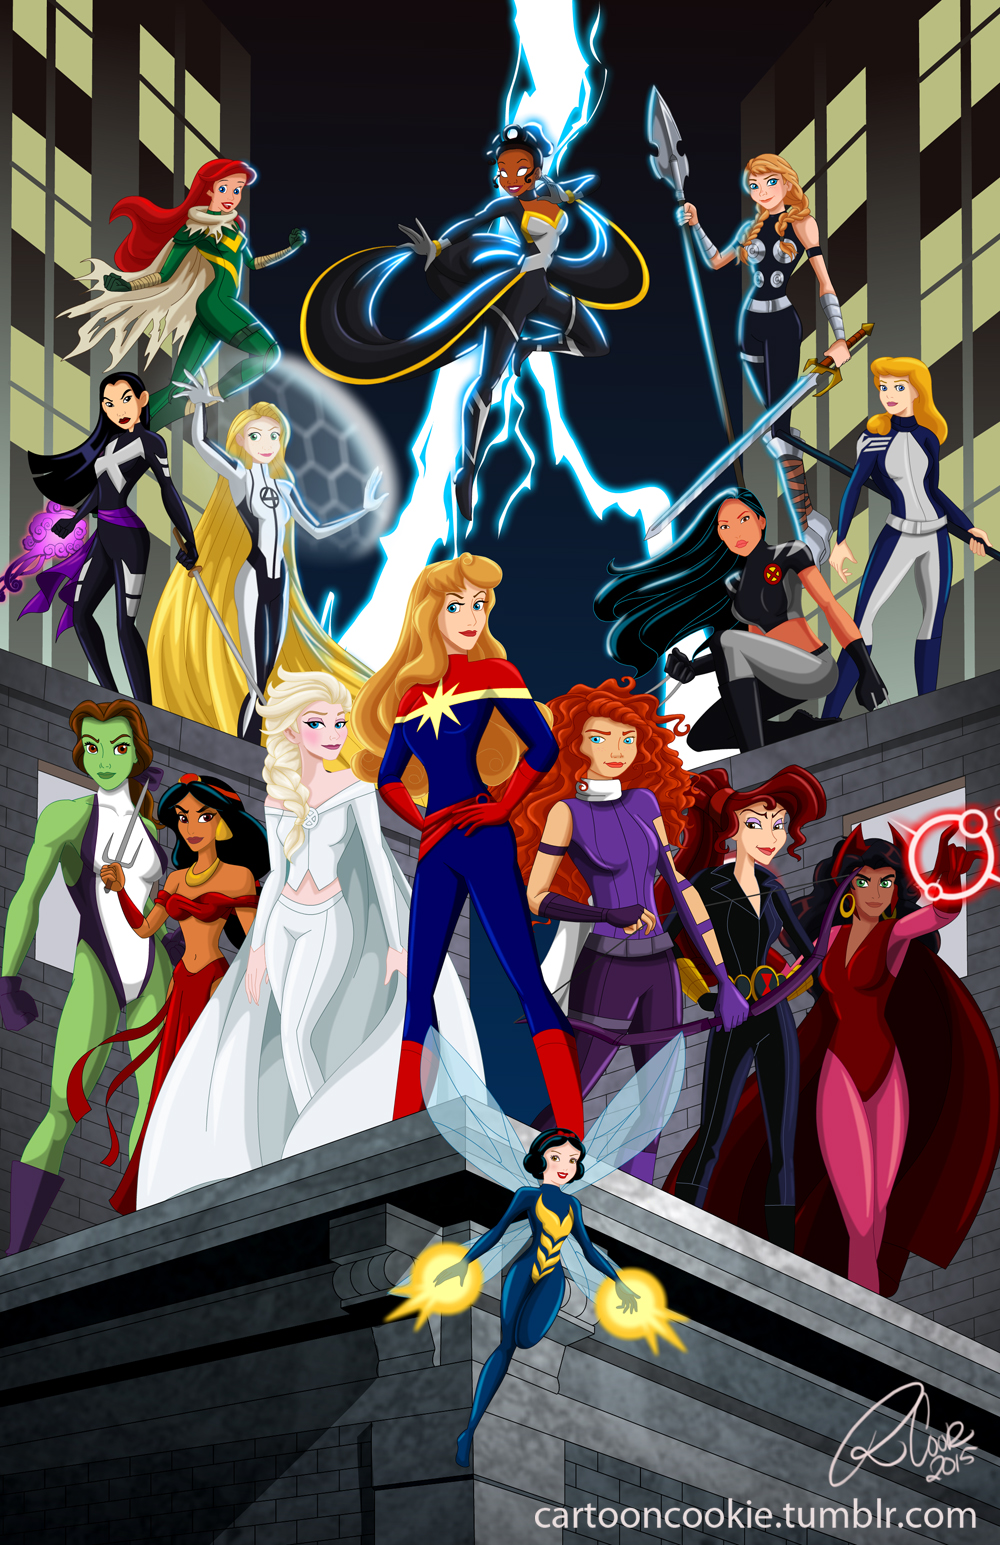 Belle Is The Best She-Hulk In This Marvel Disney Crossover | The Mary Sue